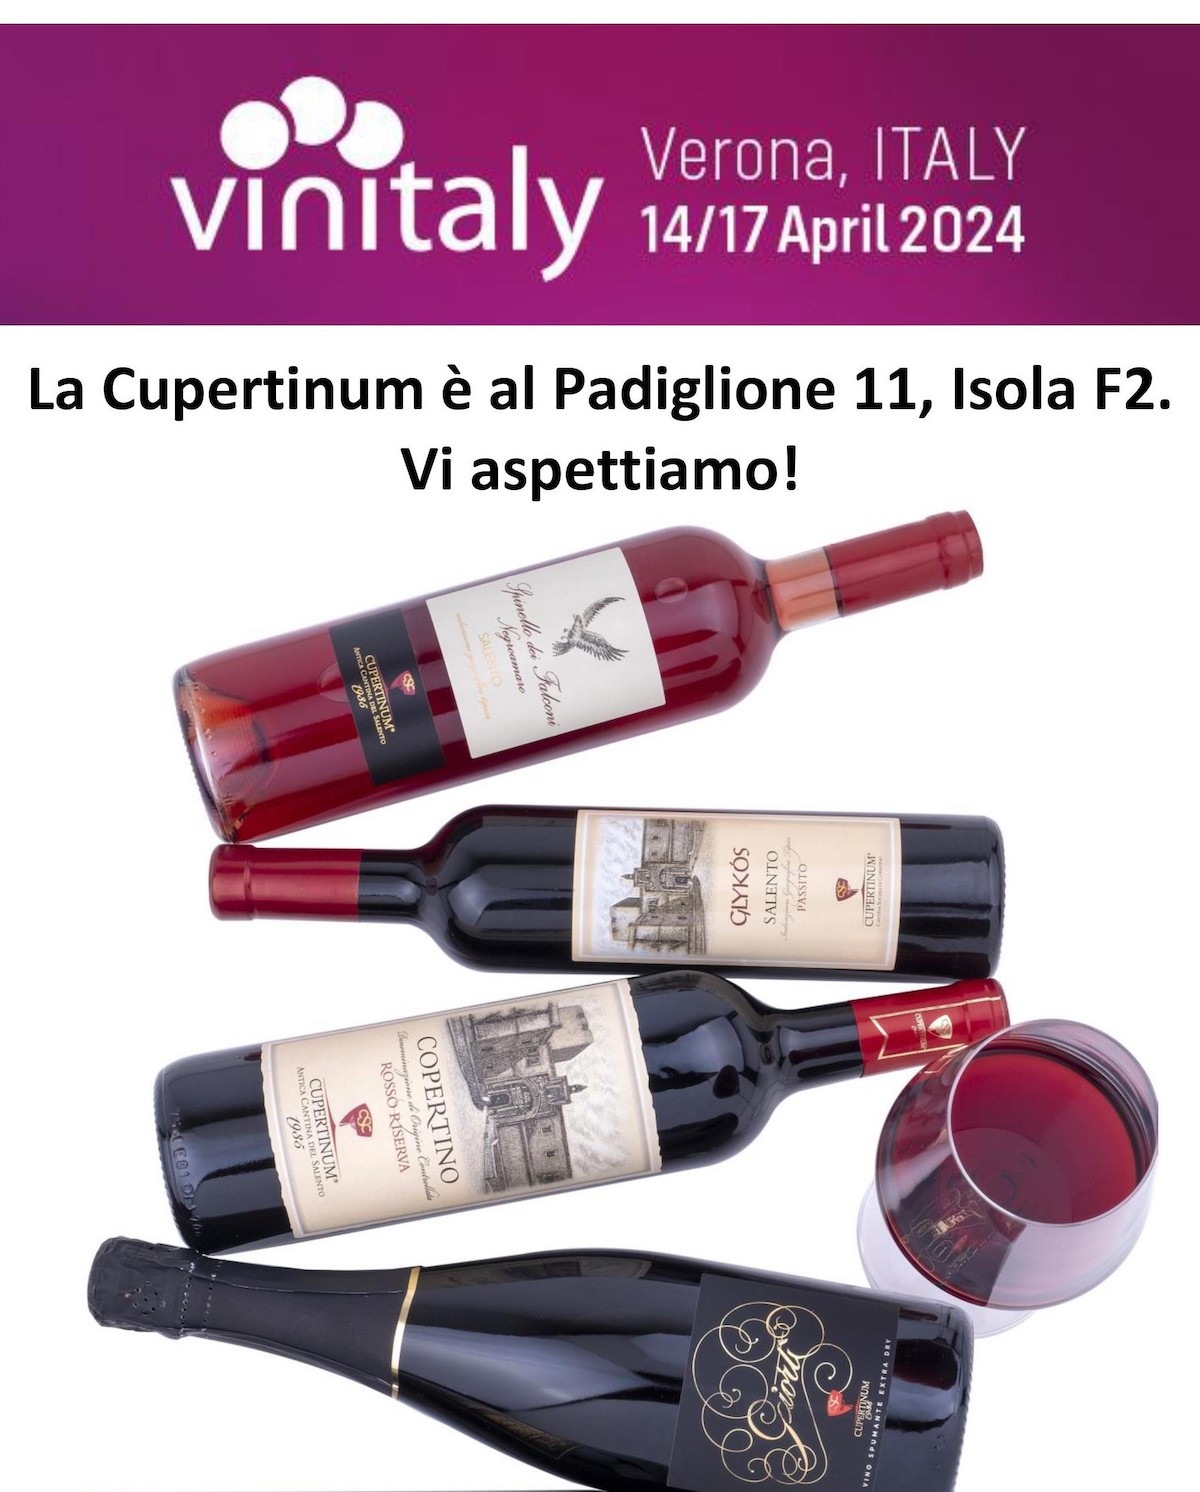 Vinitaly 2024. Cupertinum is in Hall 11, Island F2